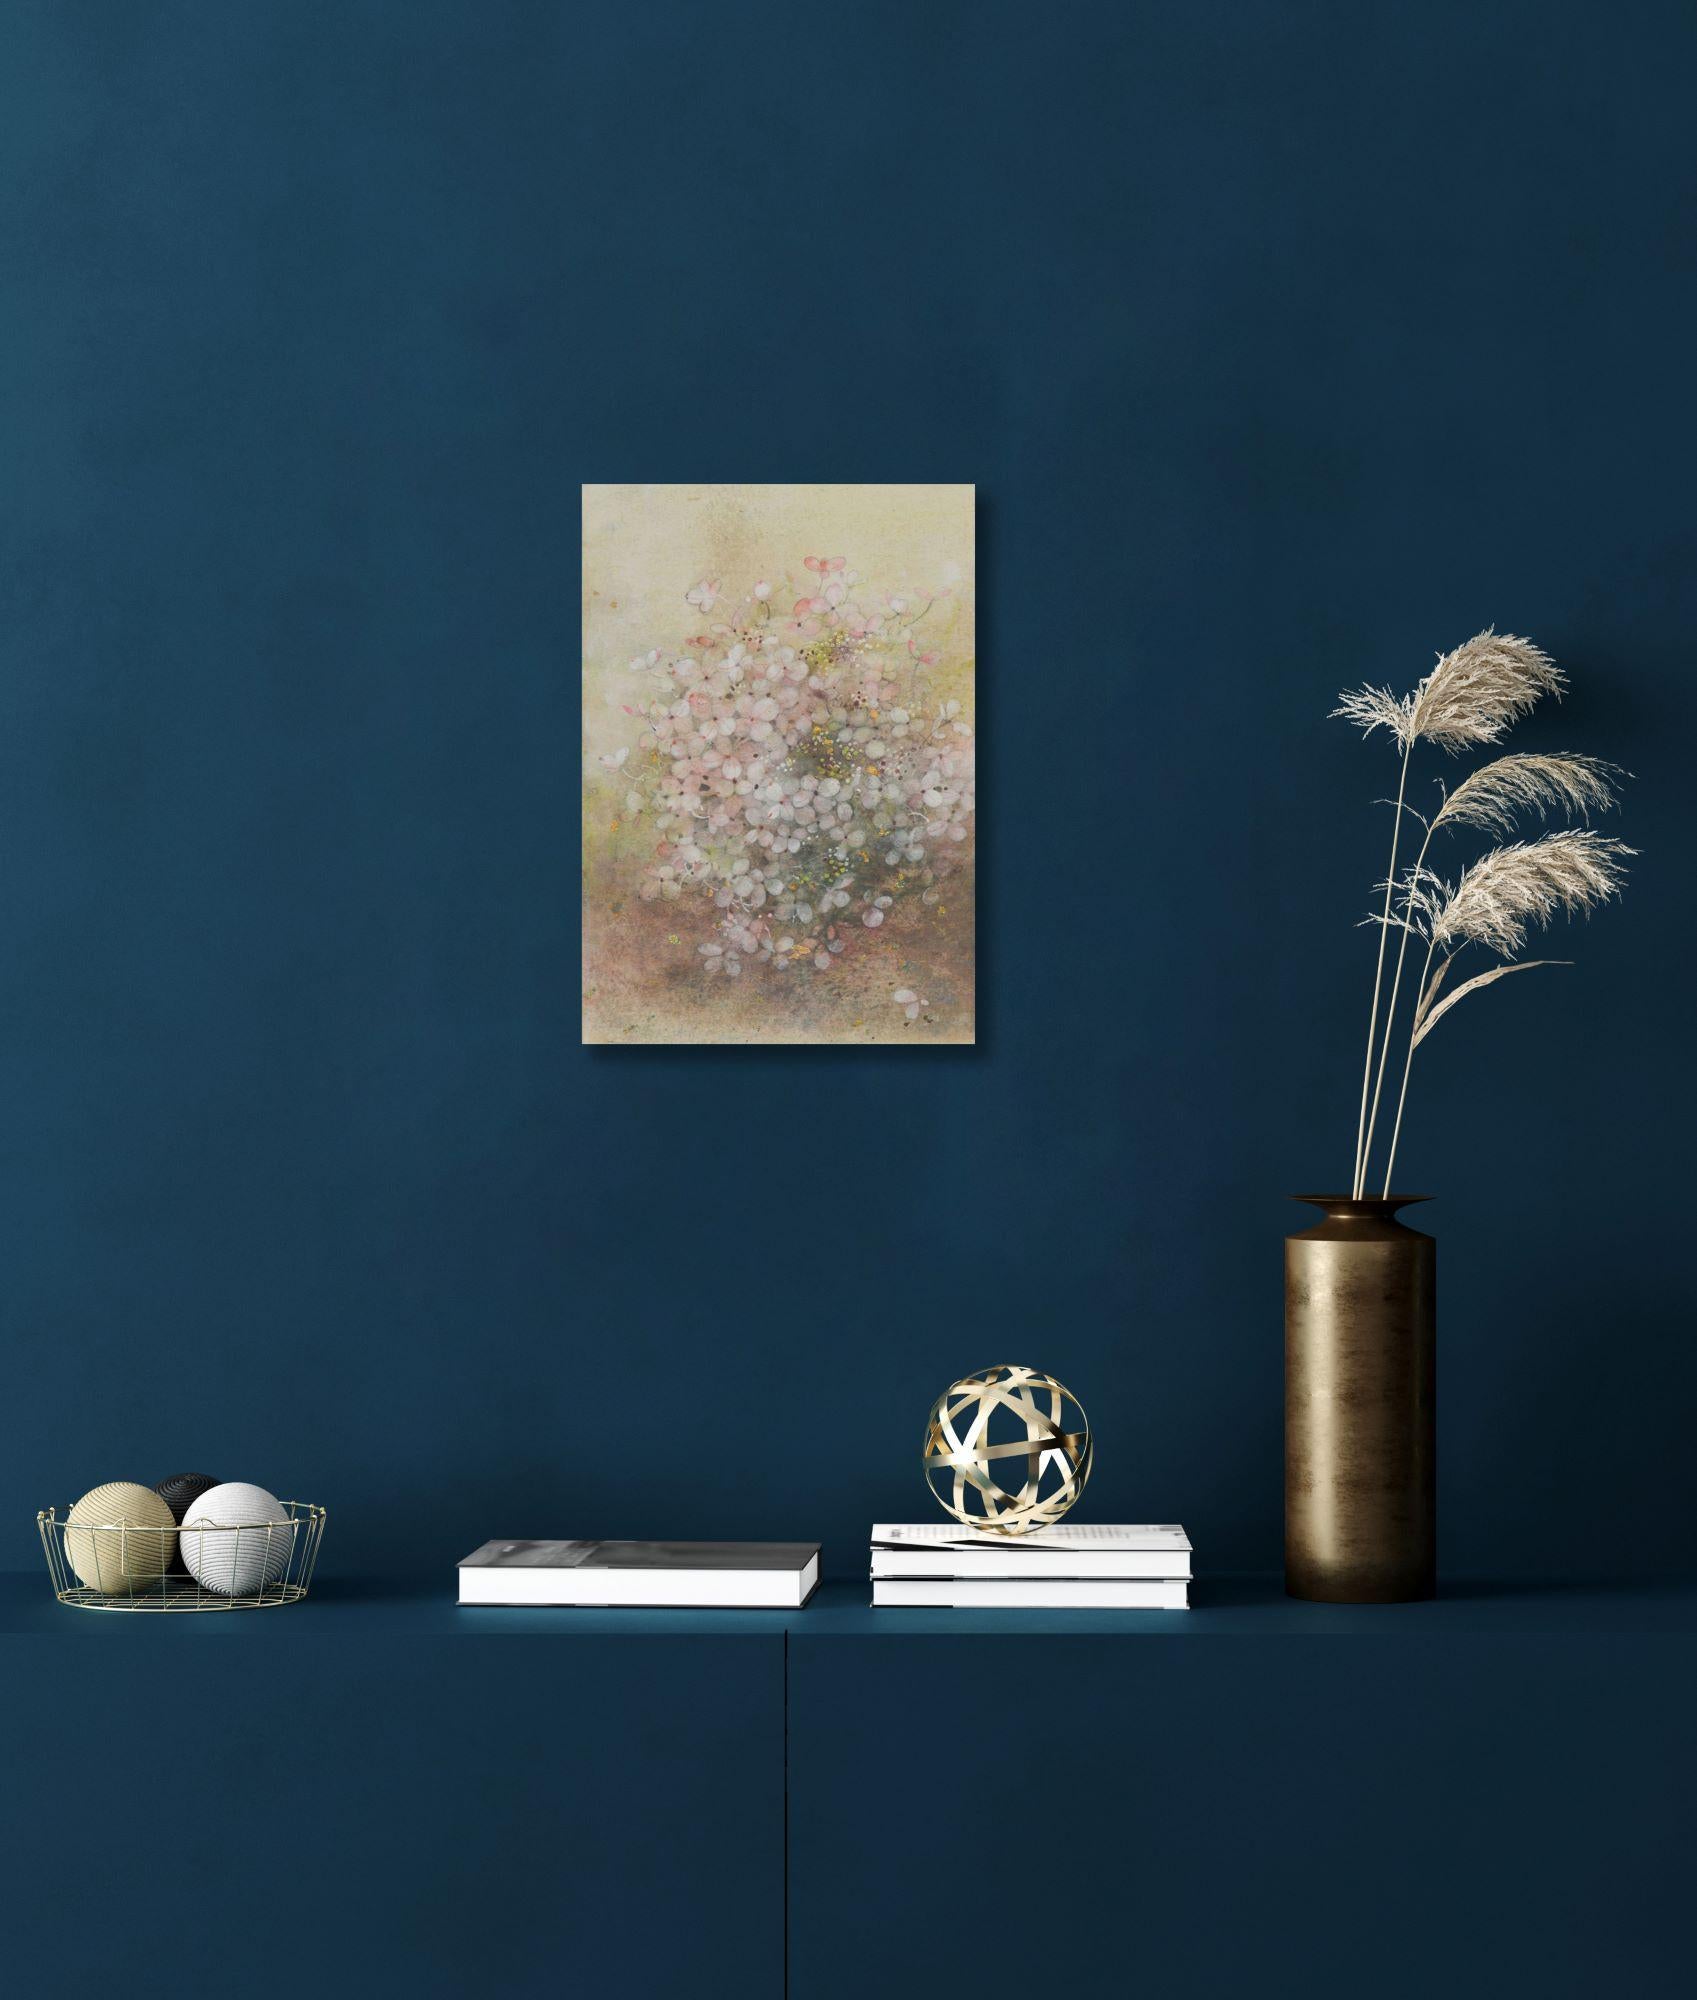 Hydrangea by Chen Yiching - Contemporary nihonga painting, flora, earth tones - Painting by Yiching Chen